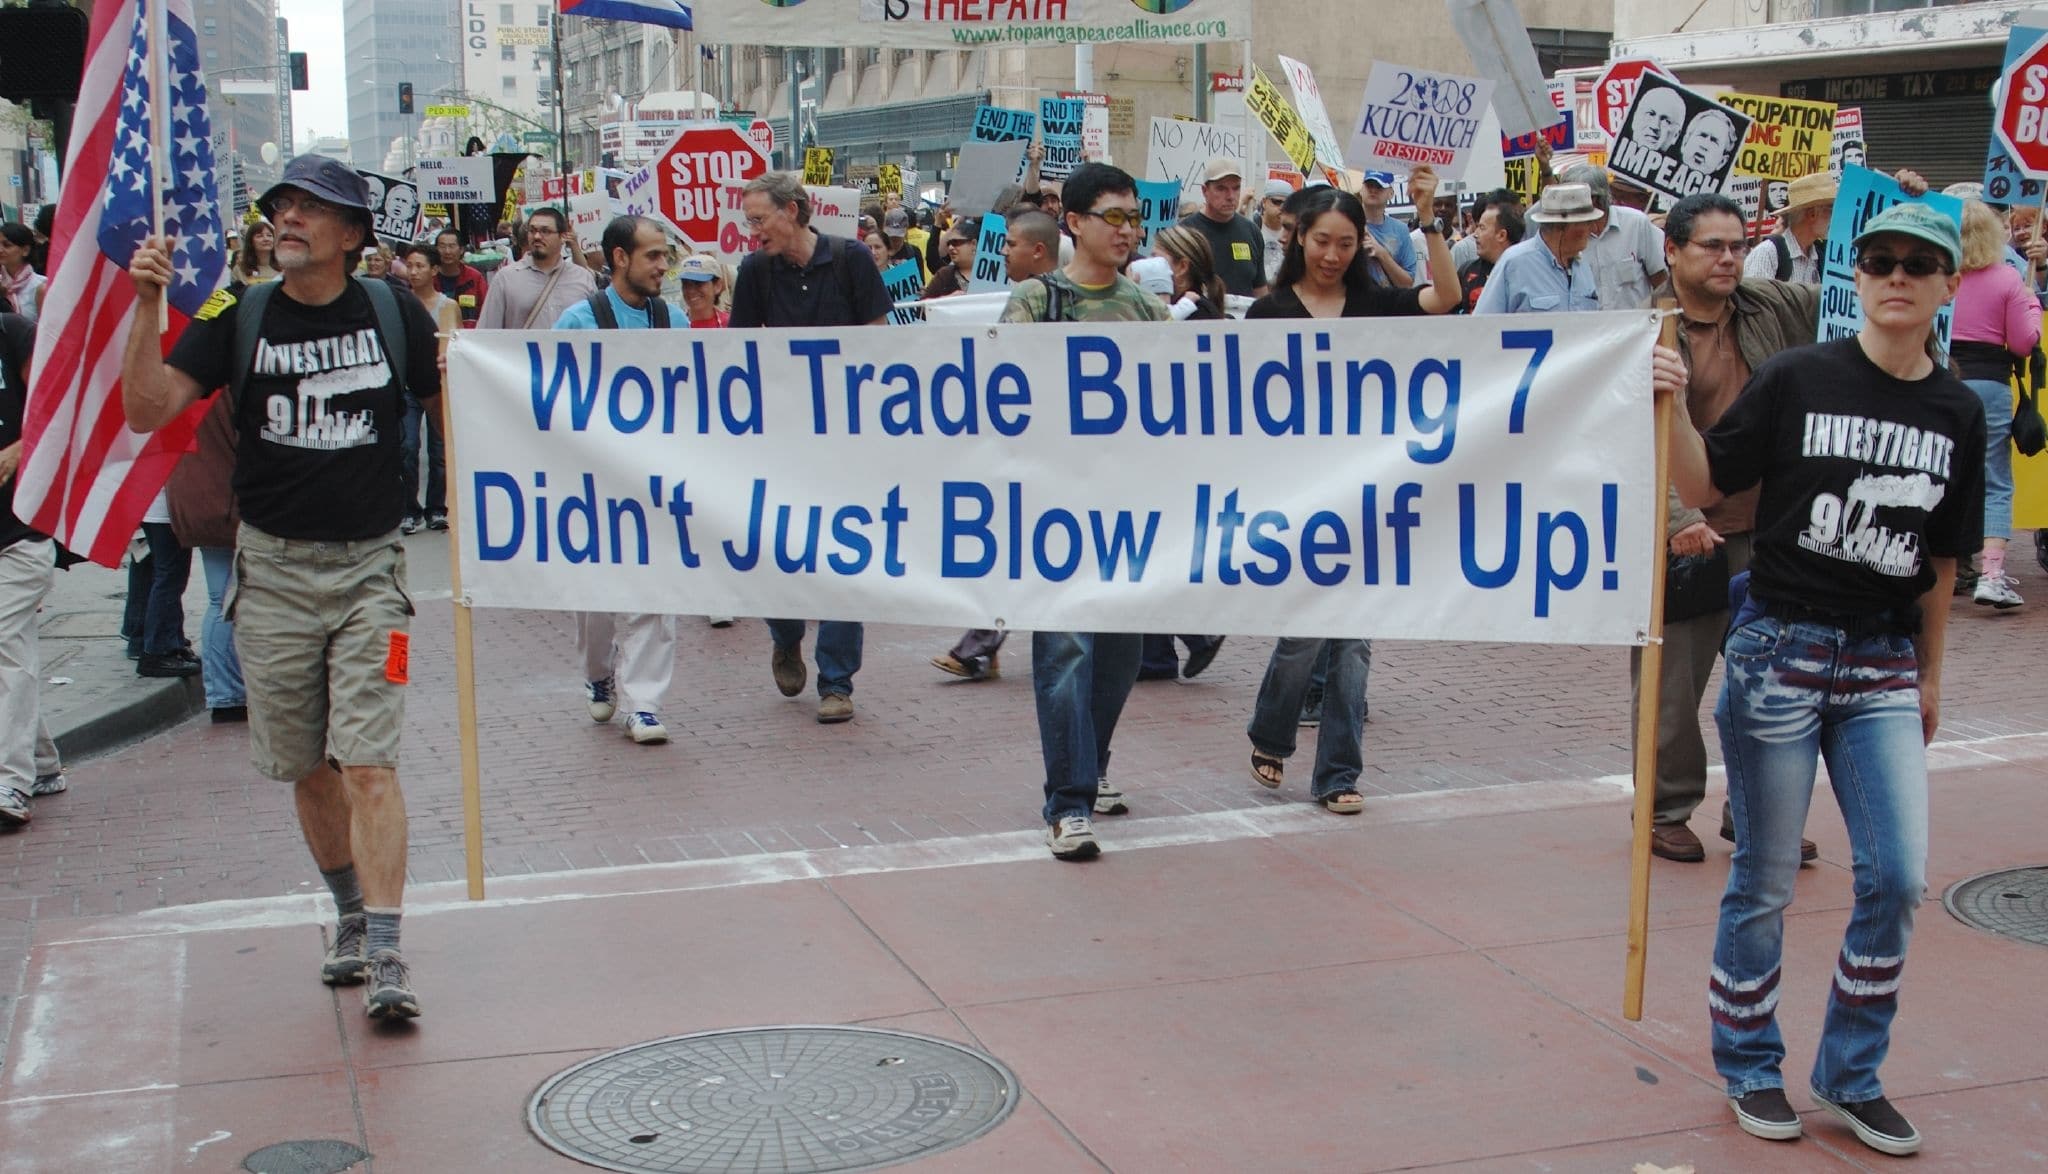 9/11 Truth Movement demonstrator, Los Angeles. Date: 28 October 2007. Source: 9/11 Was an Inside Job. Author: Damon D'Amato from North Hollywood, Calfornia. (CC BY 2.0)